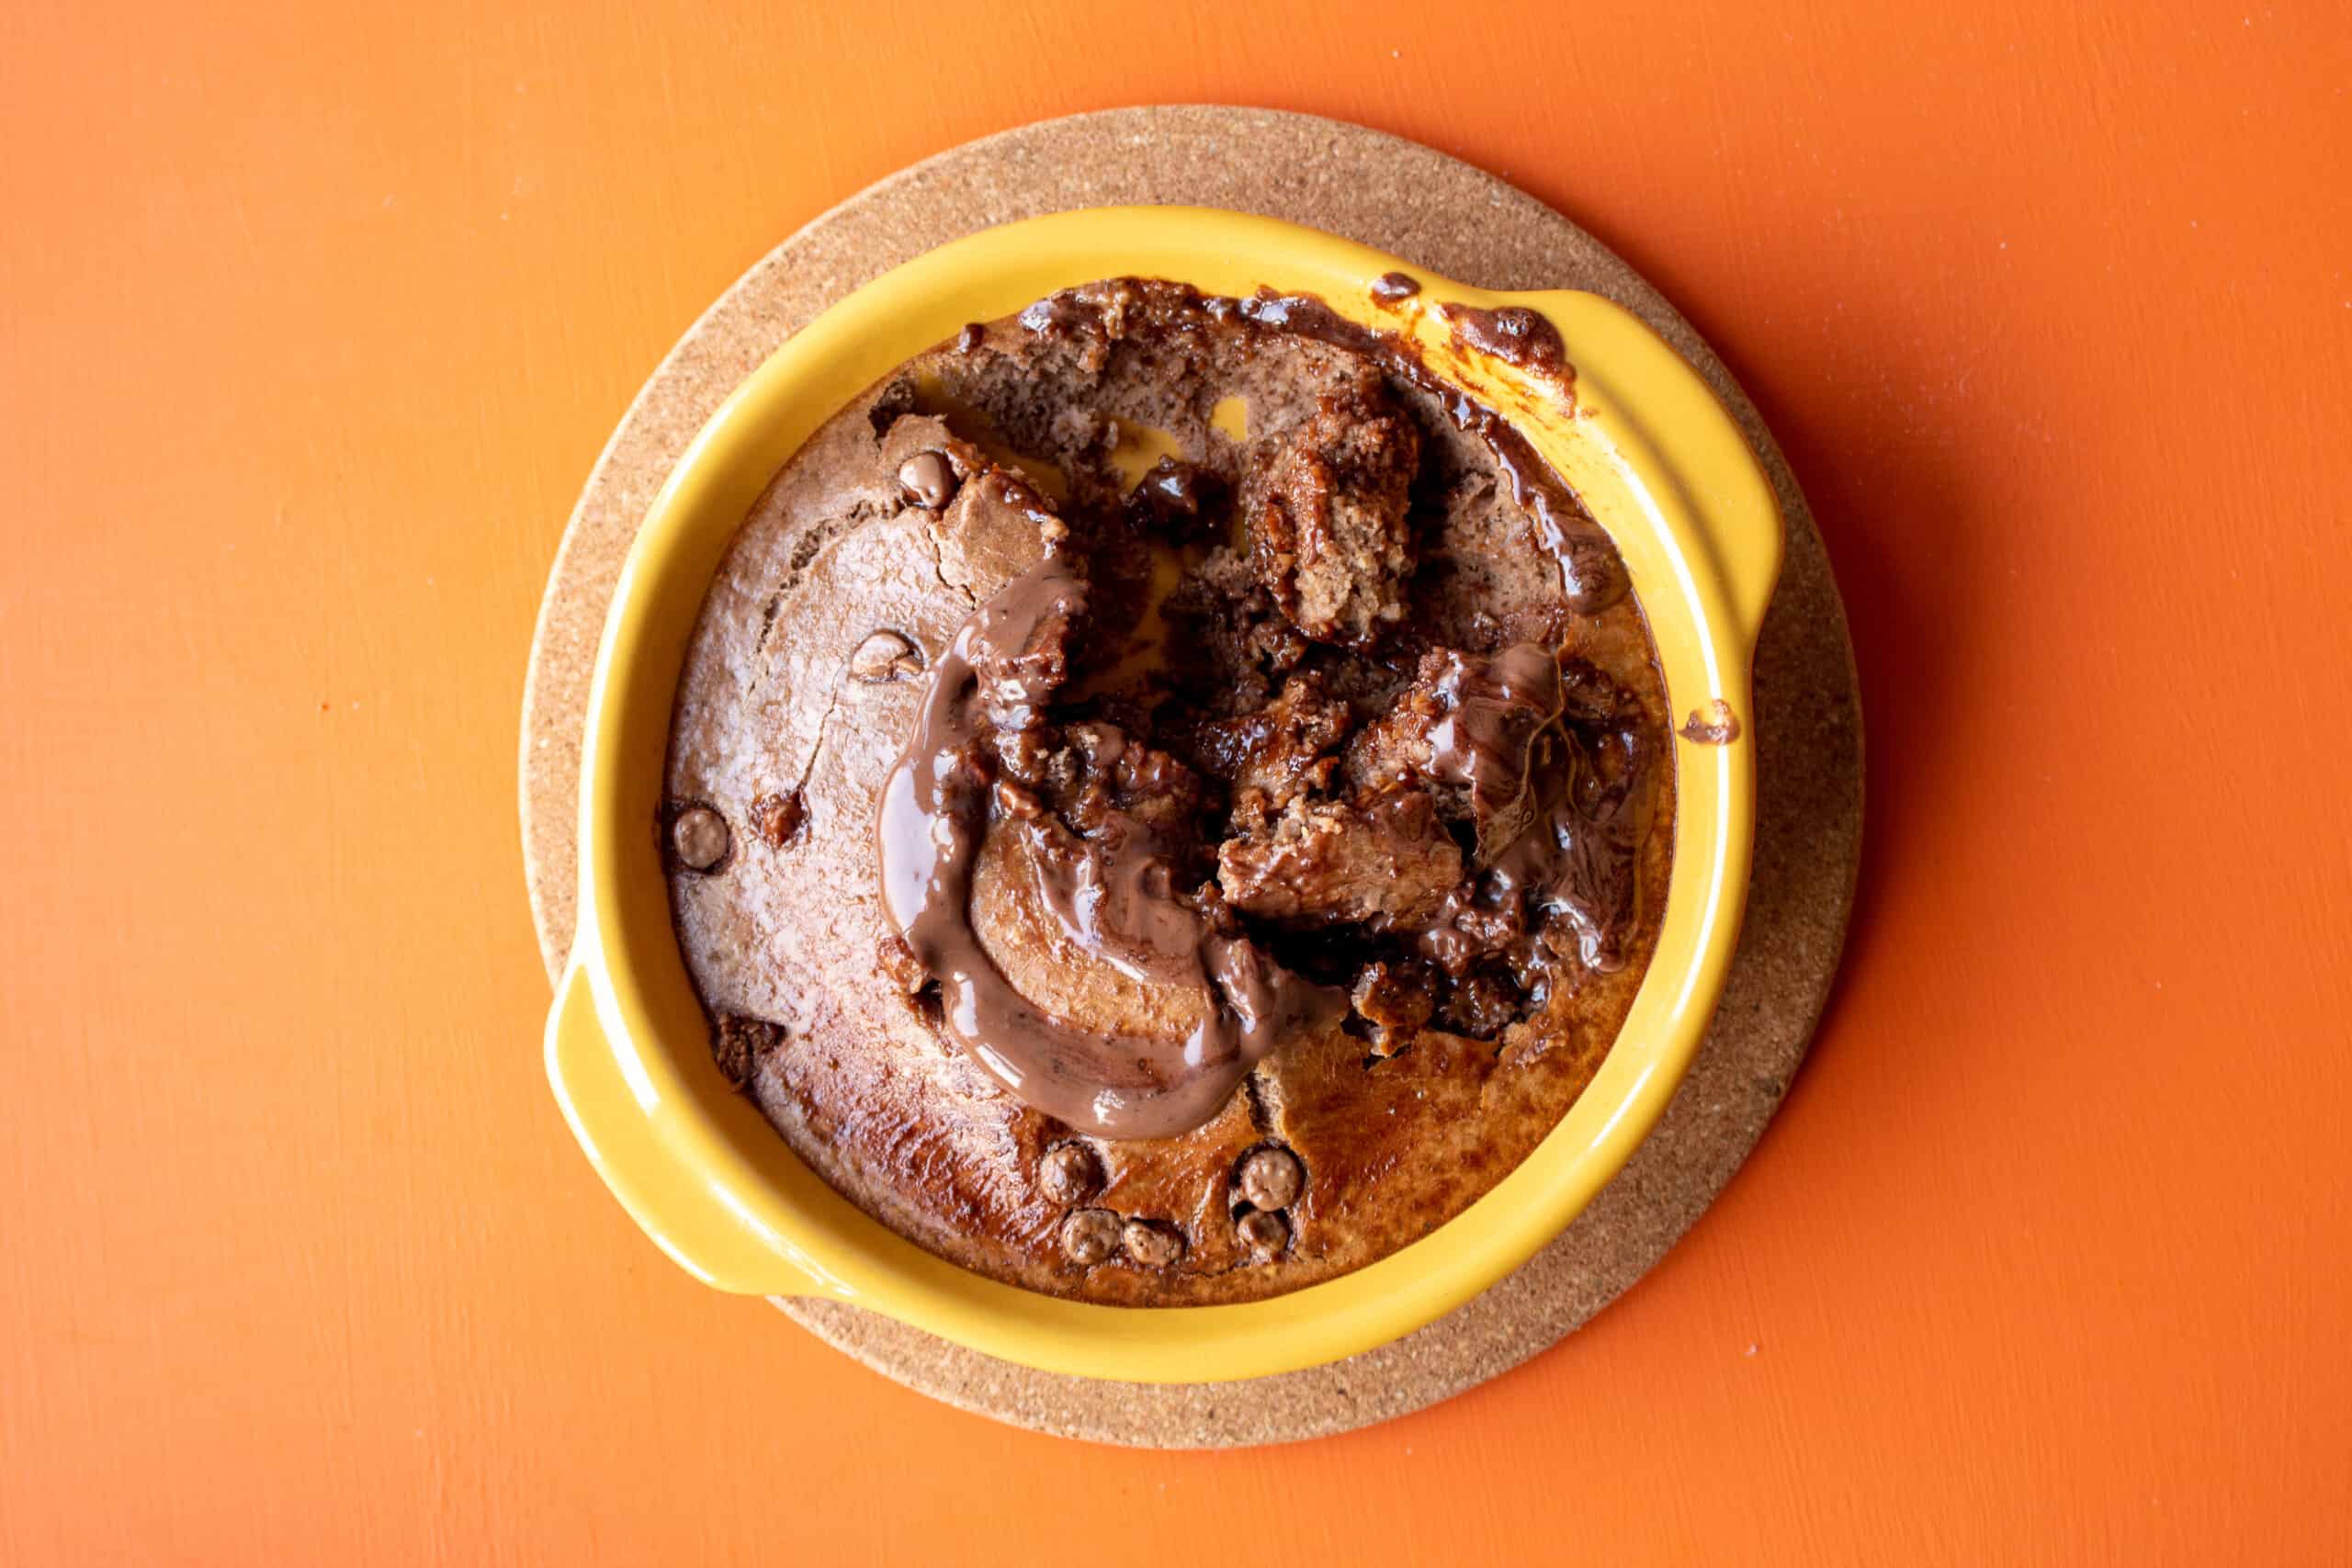 Nutella baked oats with a spoon full from the middle eaten on a heat mat on an orange background.